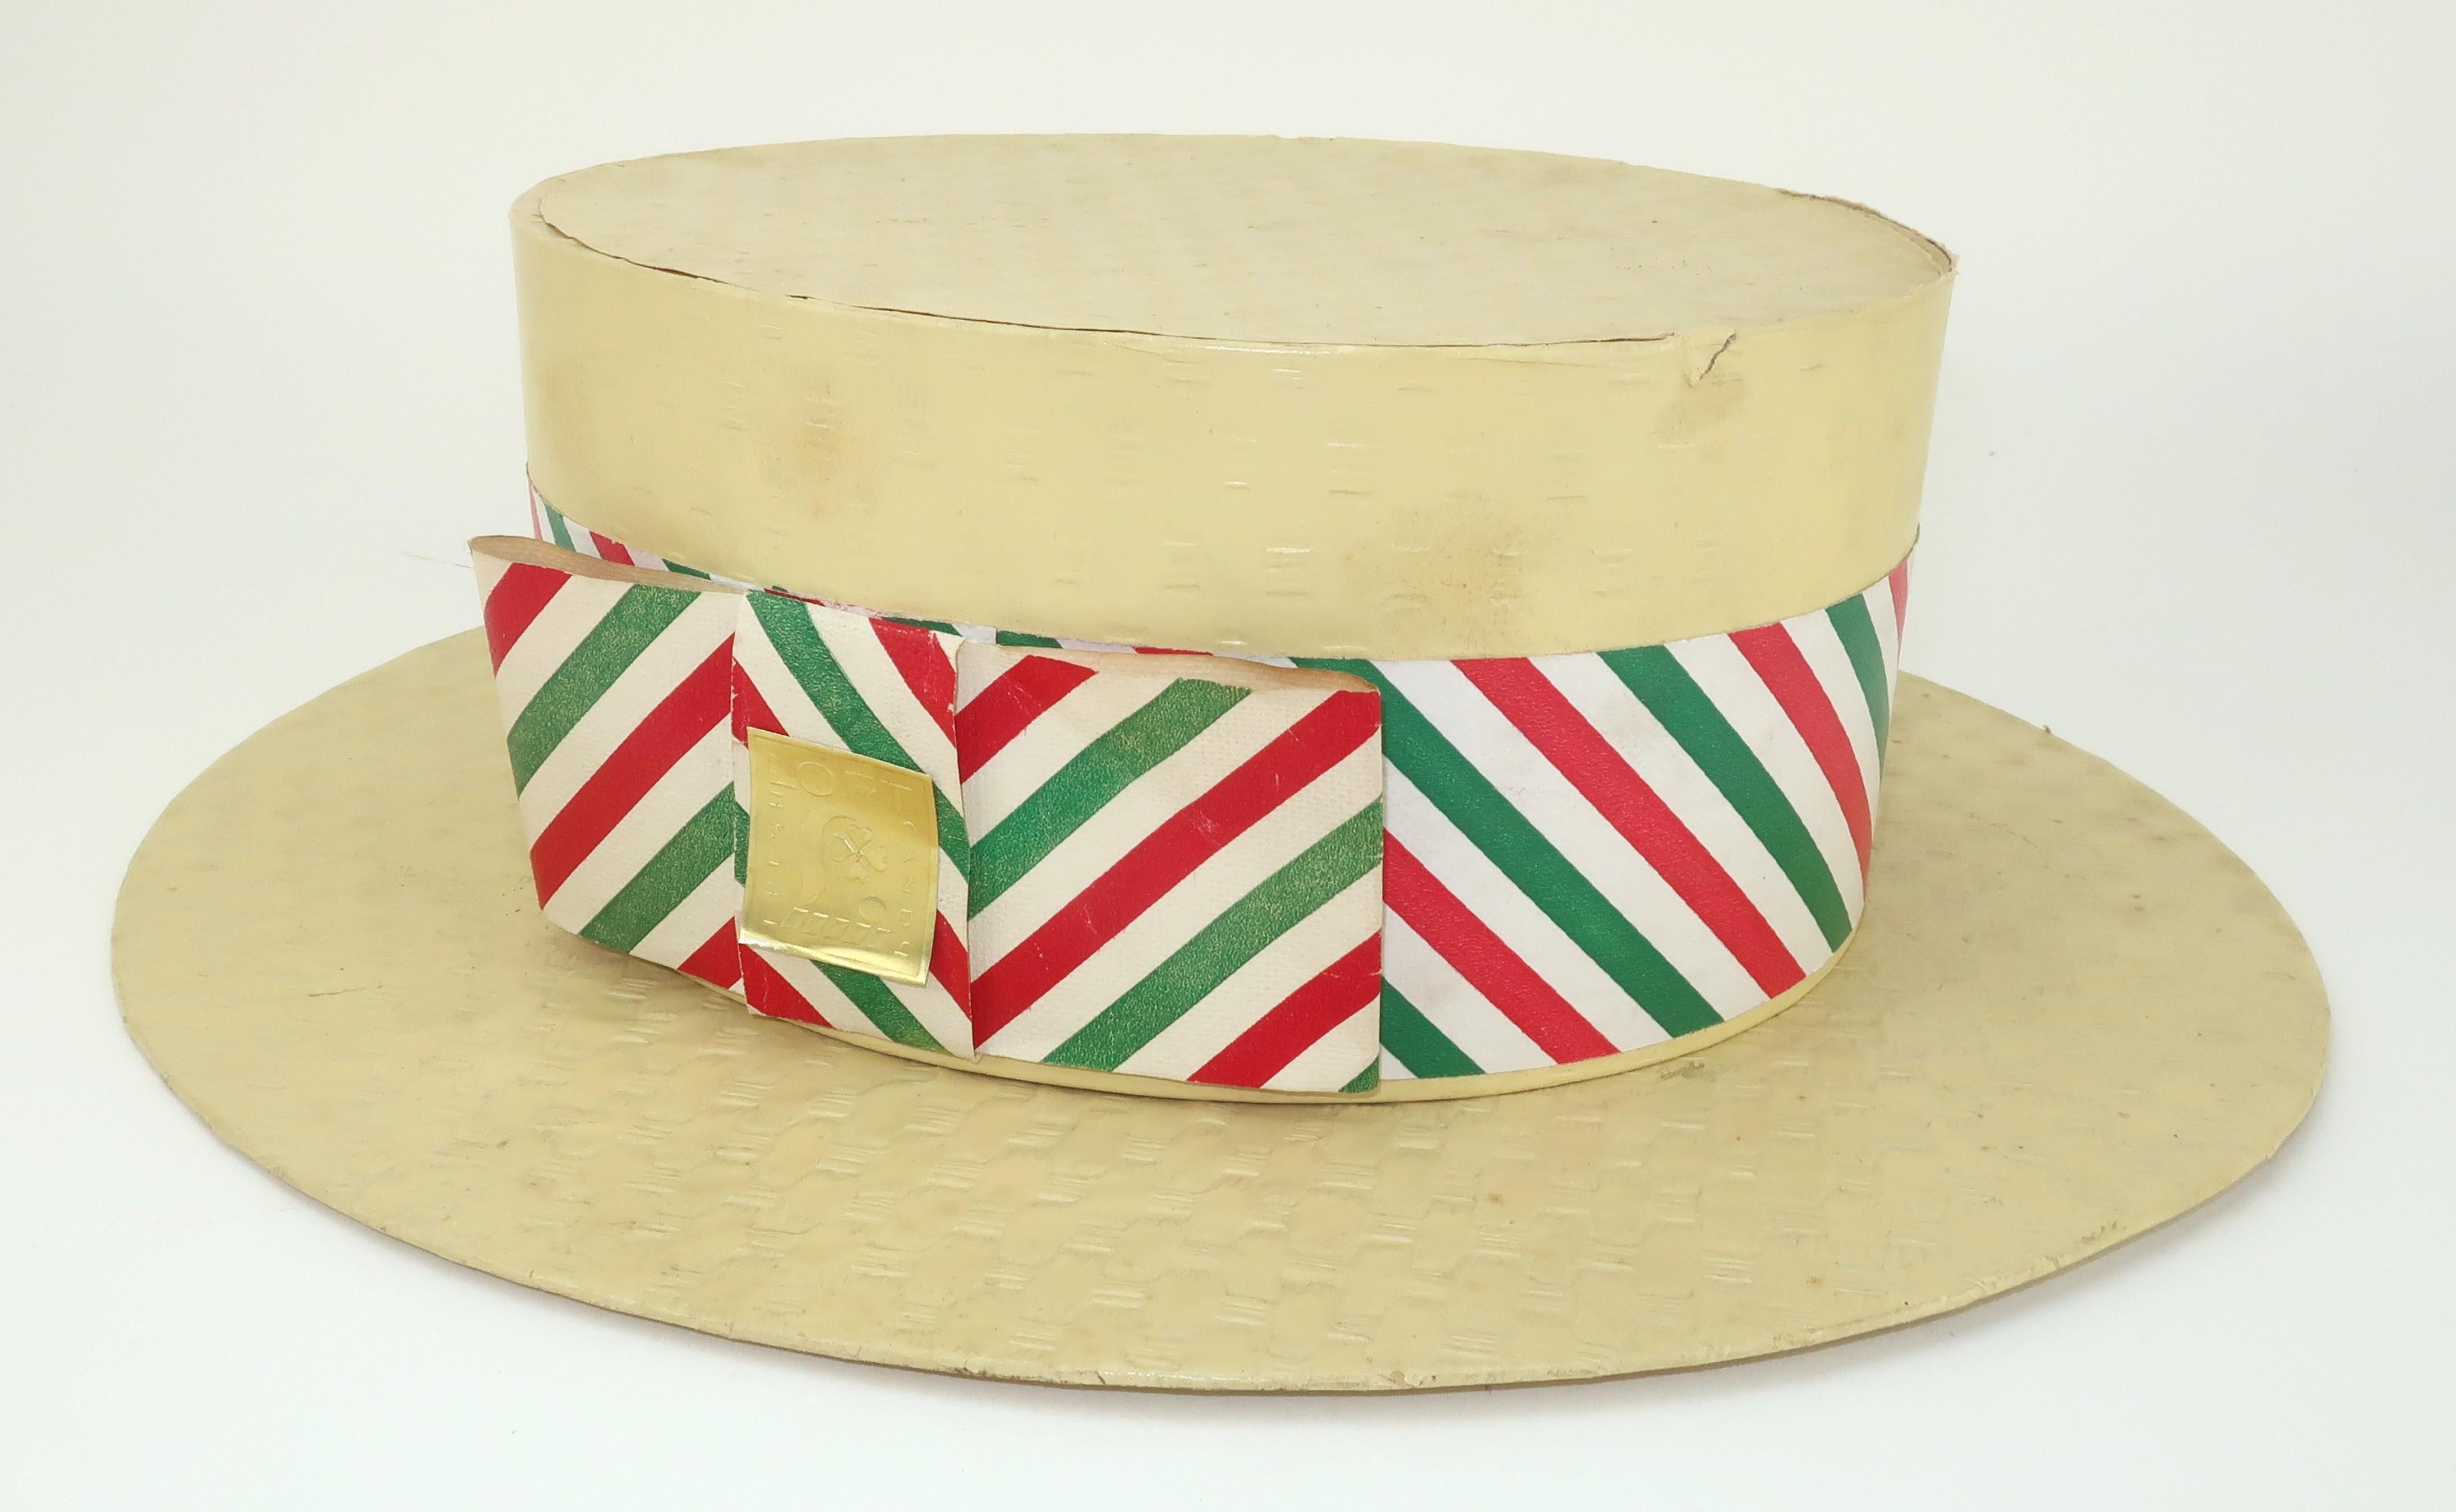 Once upon a time, this charming boater style hat had a sweet secret ... it was a novelty candy container box produced by Loft's Candies of New York. Loft's was founded in 1860 and by the 1920's was the world's largest candy seller in the world. The